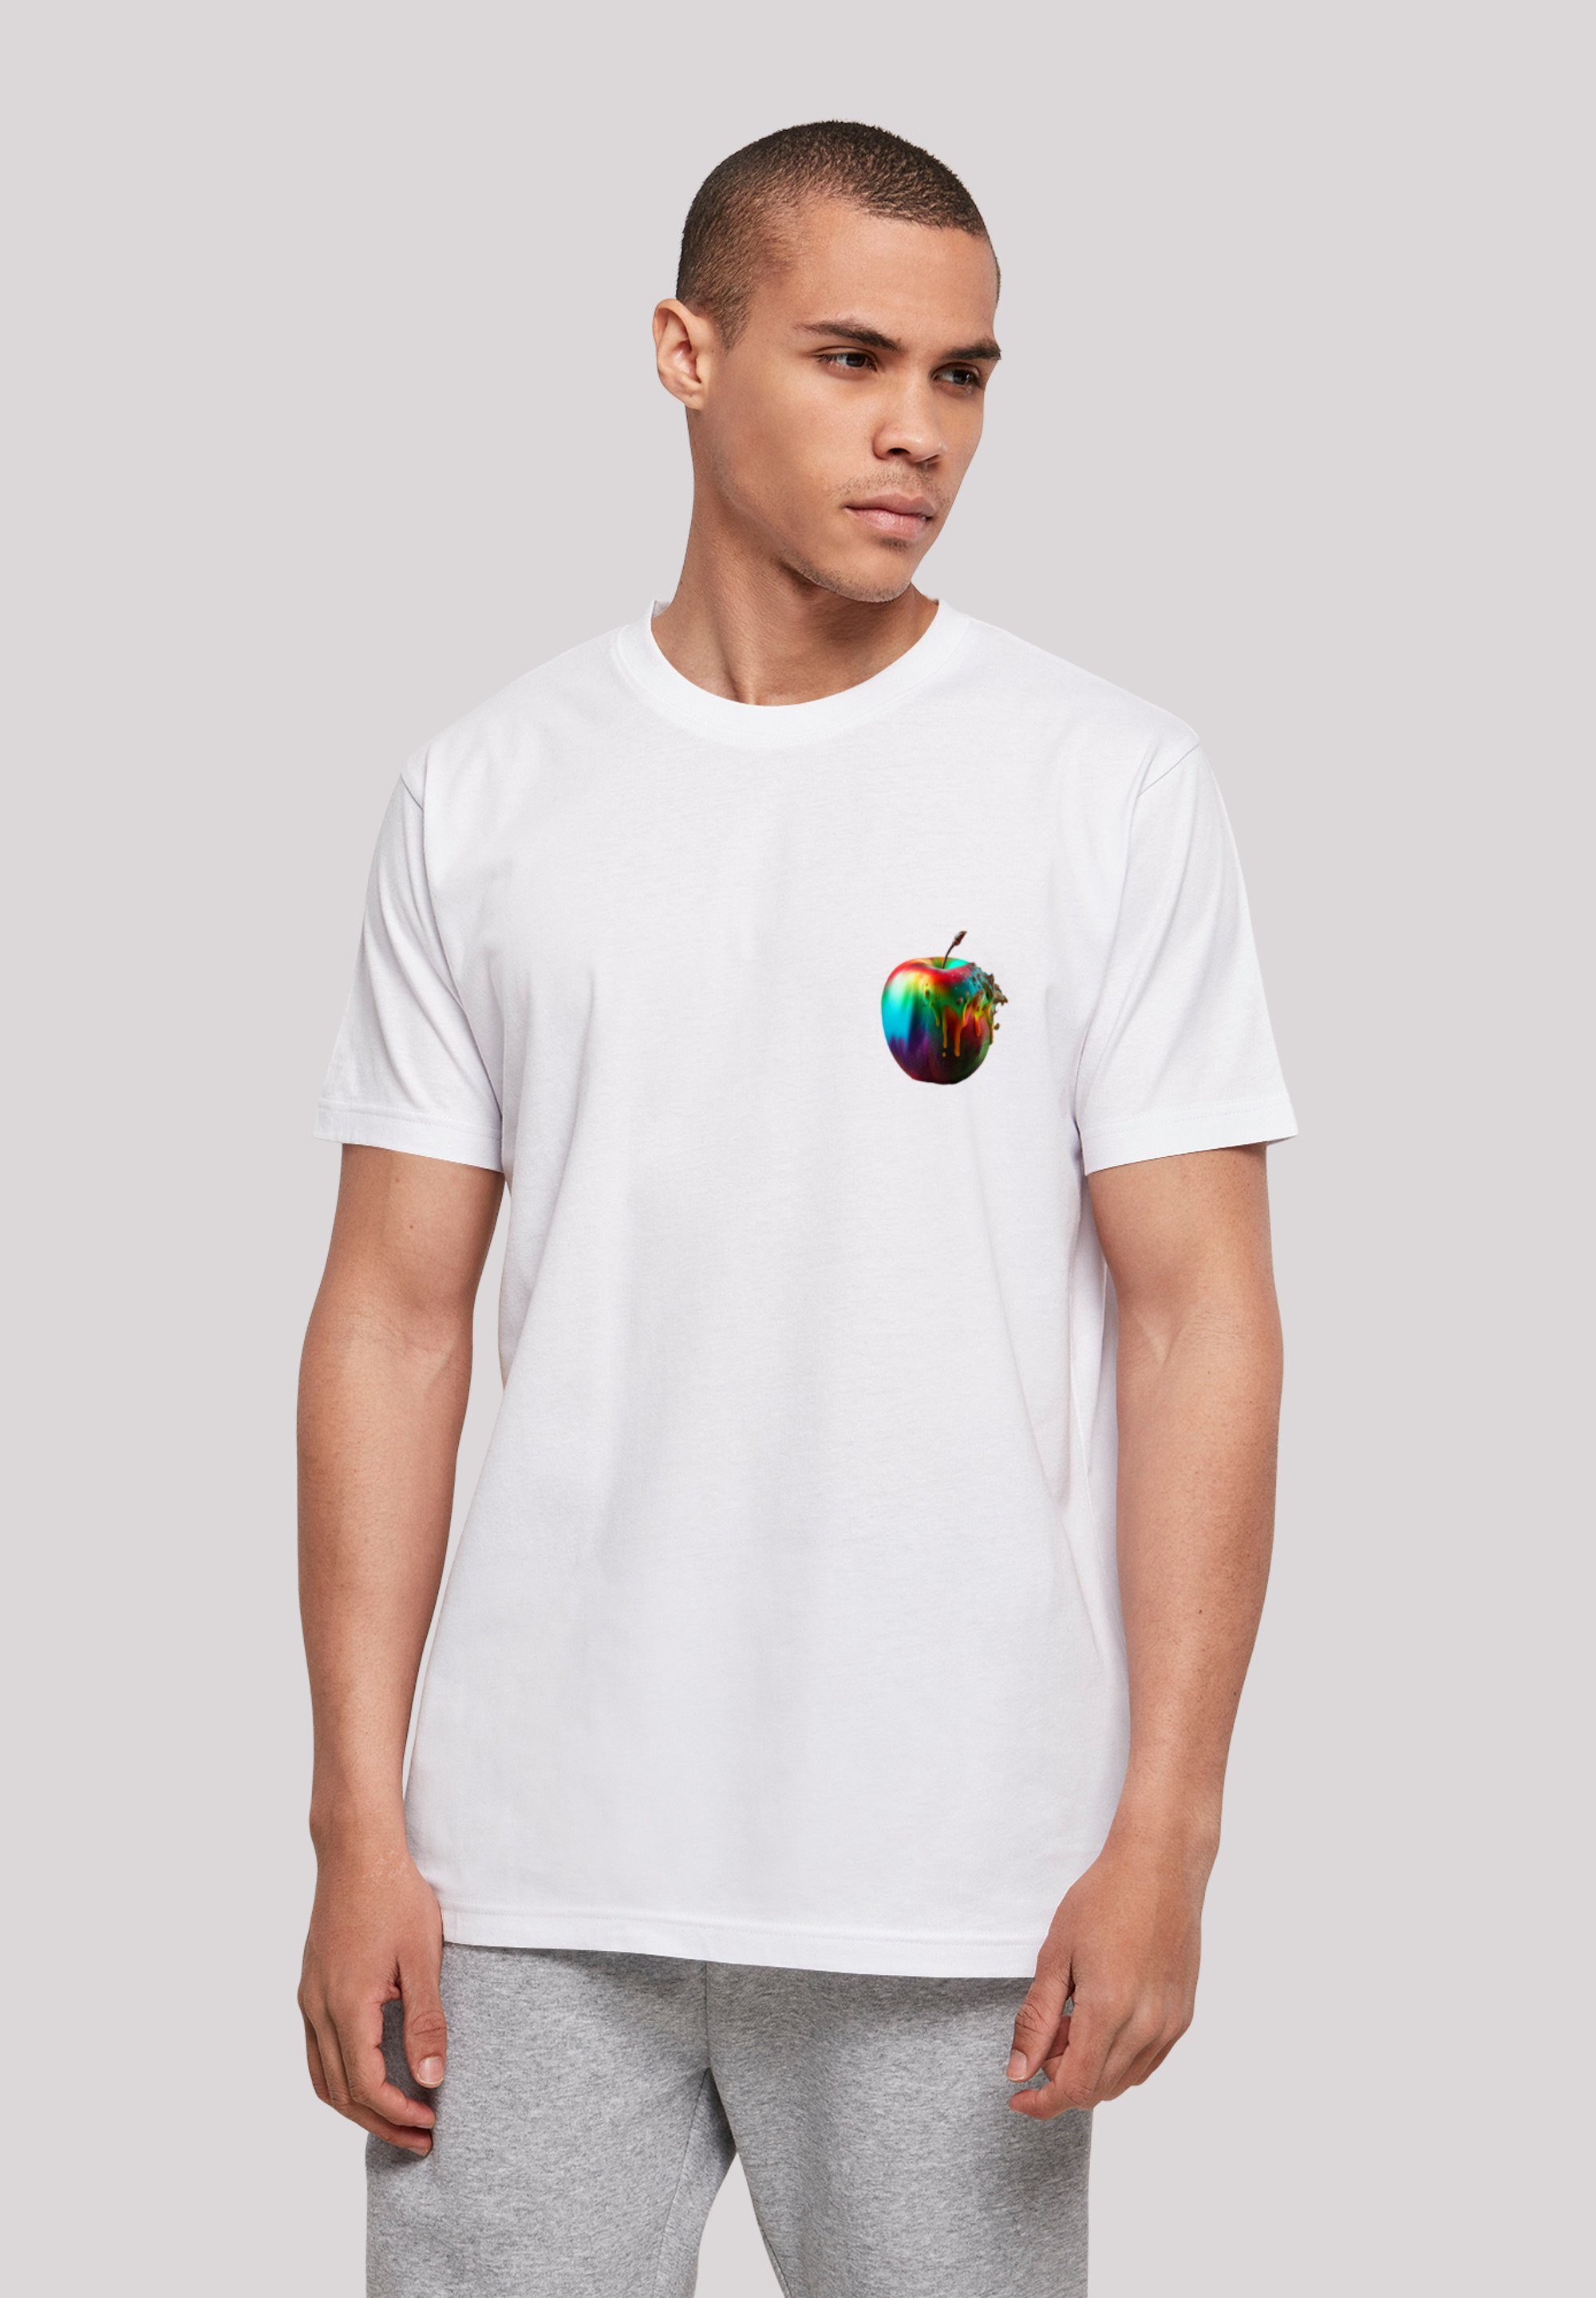 F4NT4STIC T-Shirt Colorfood Collection - Rainbow Apple Print weiß